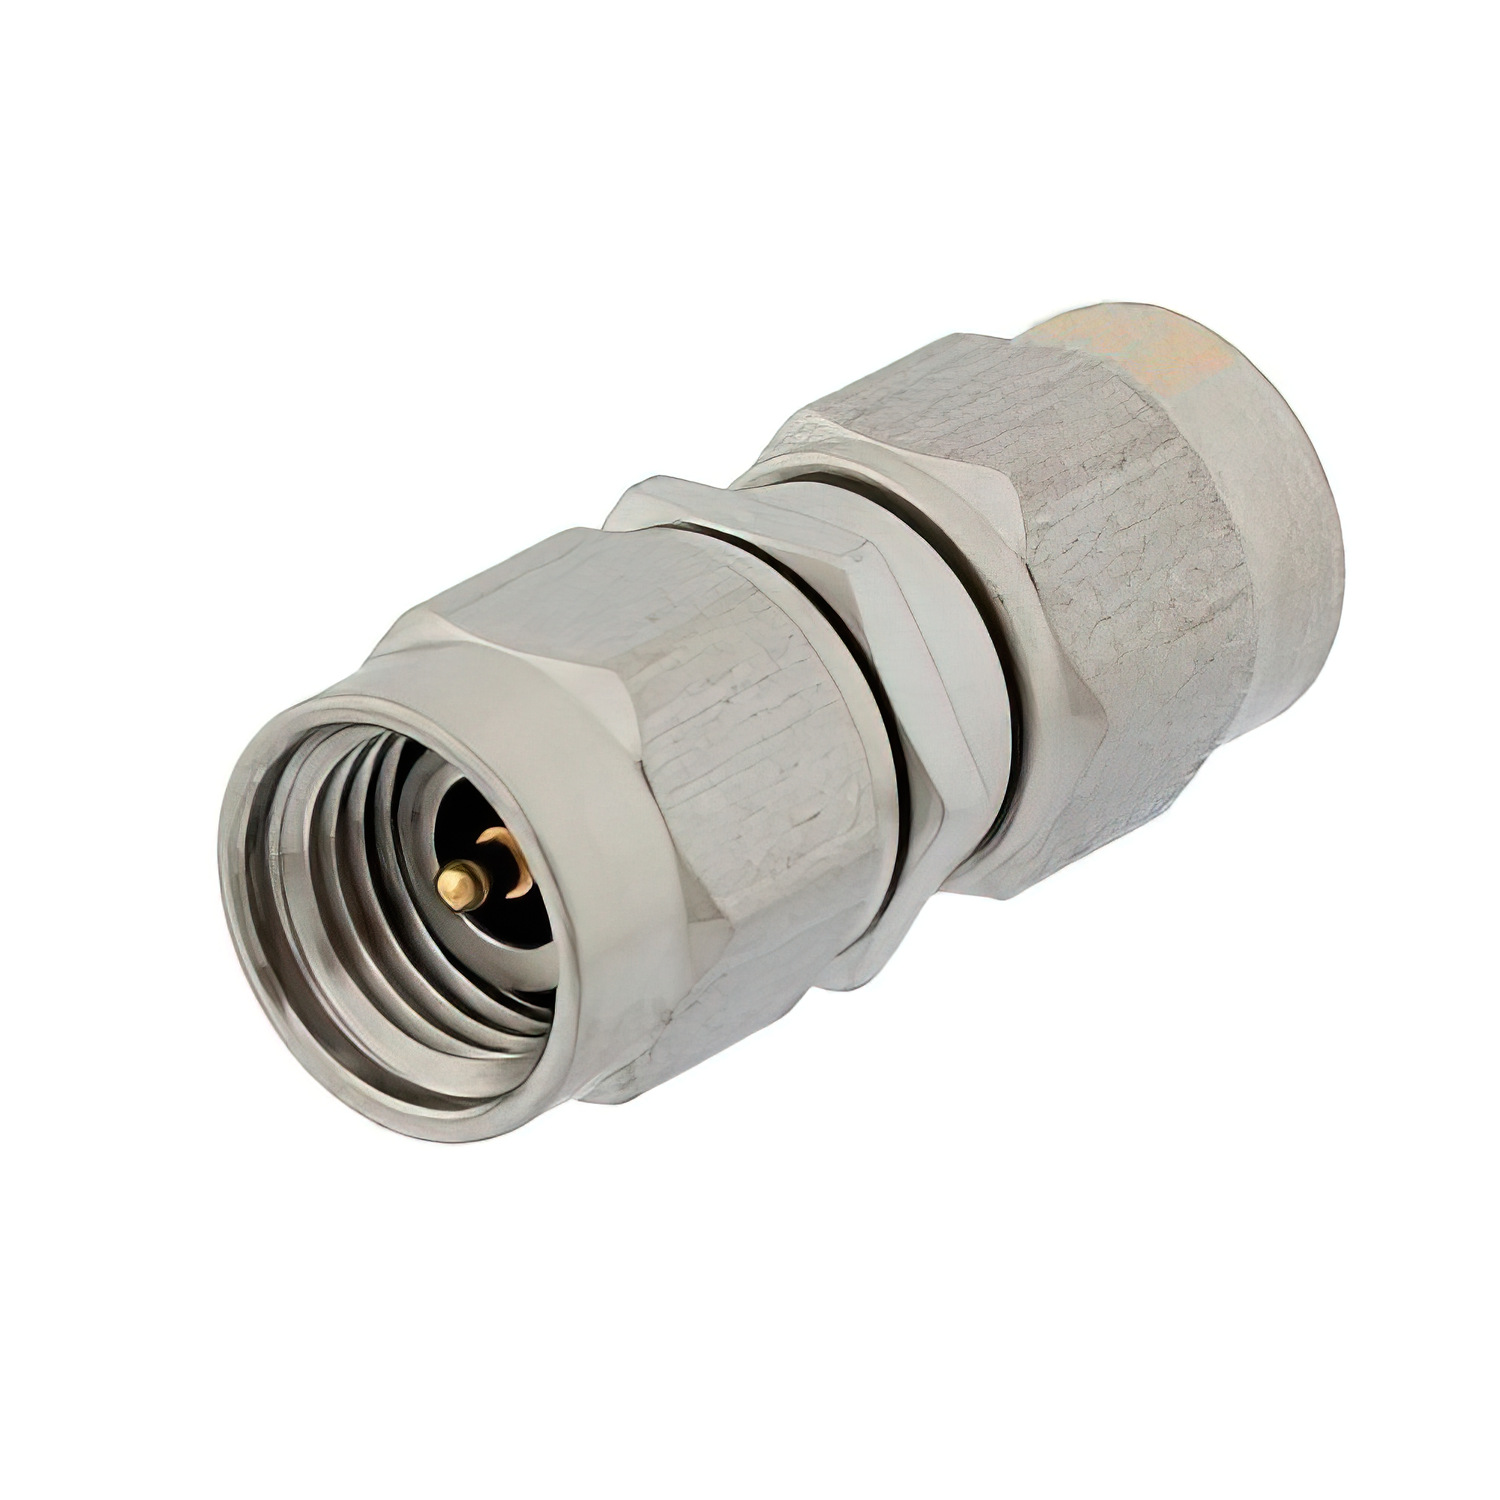 2.92mm male to 2.92mm male adapter1